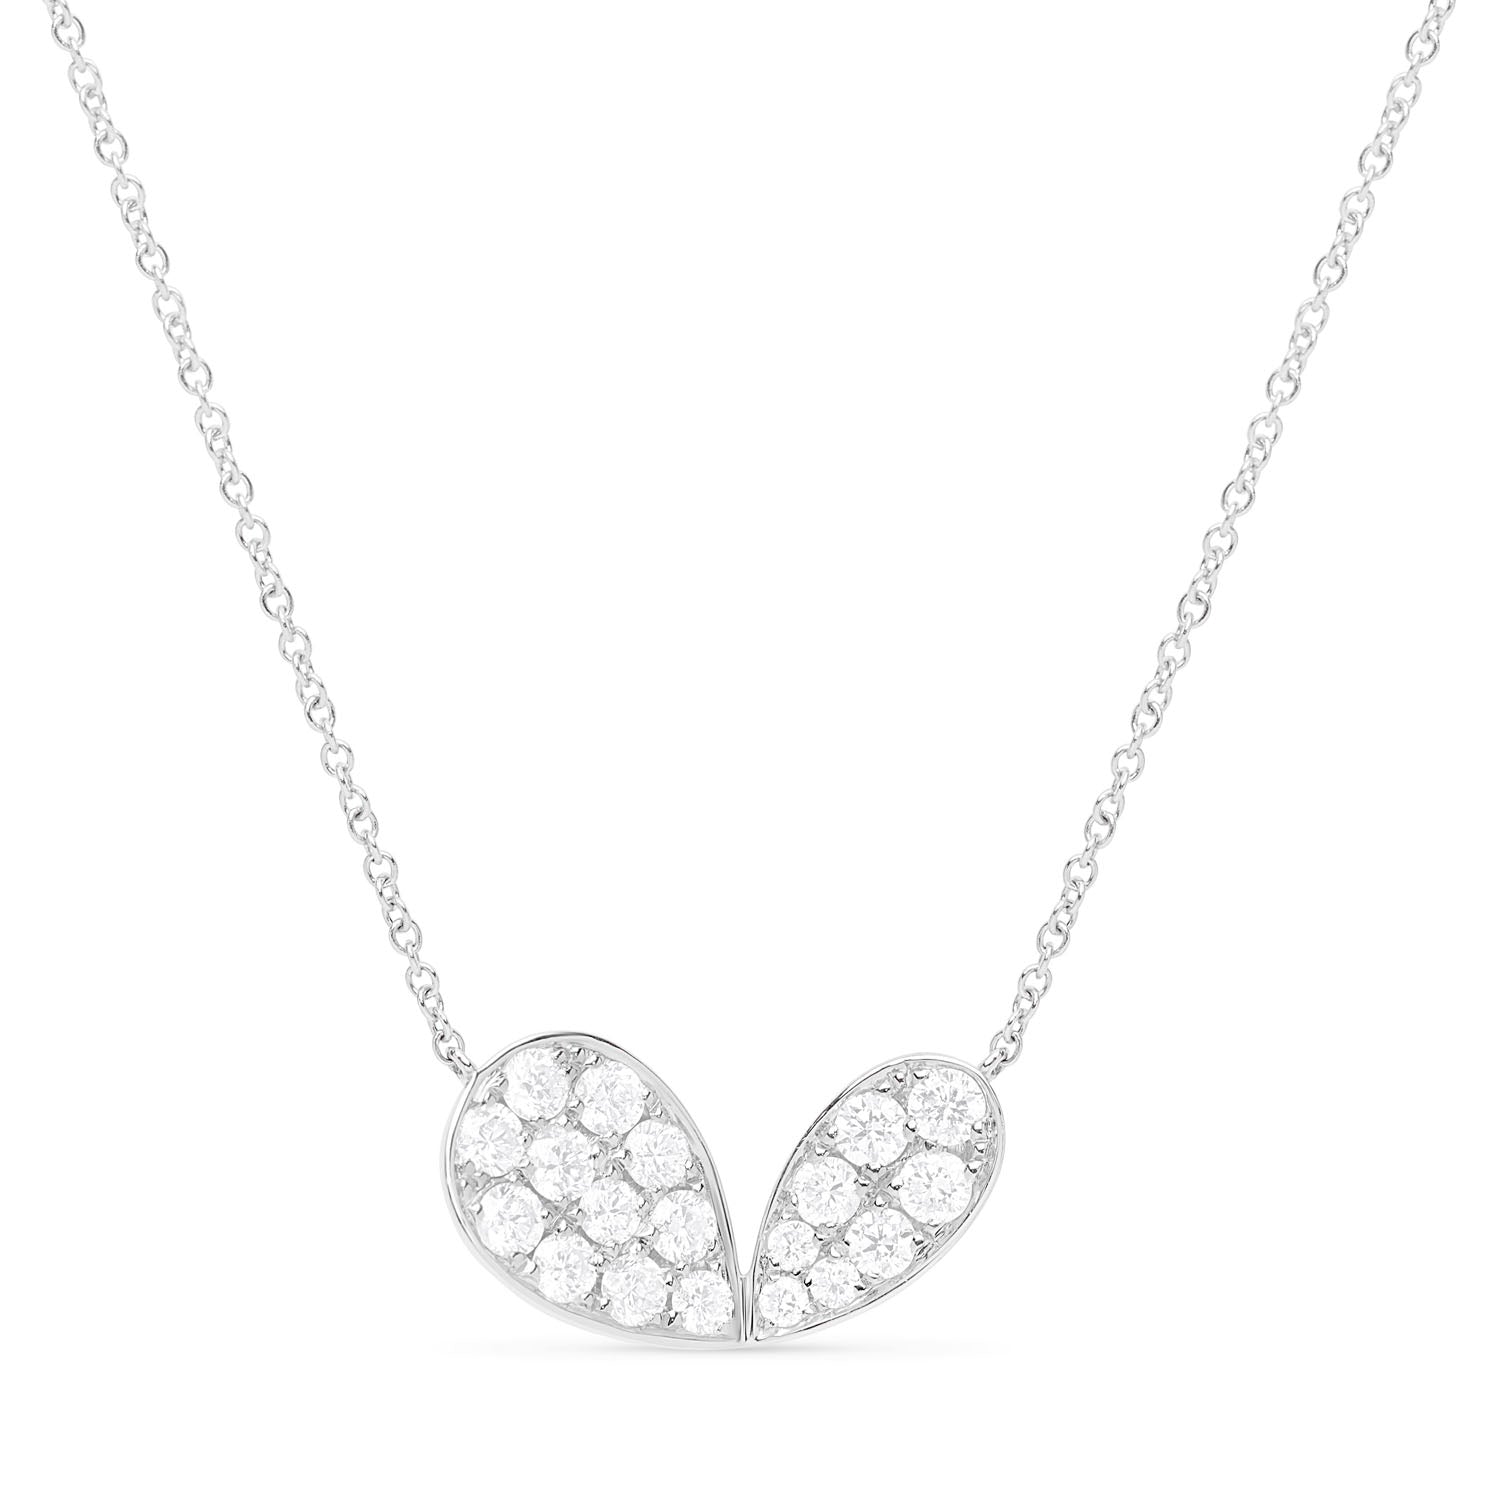 Whispers of Love Maxi Necklace - White Gold